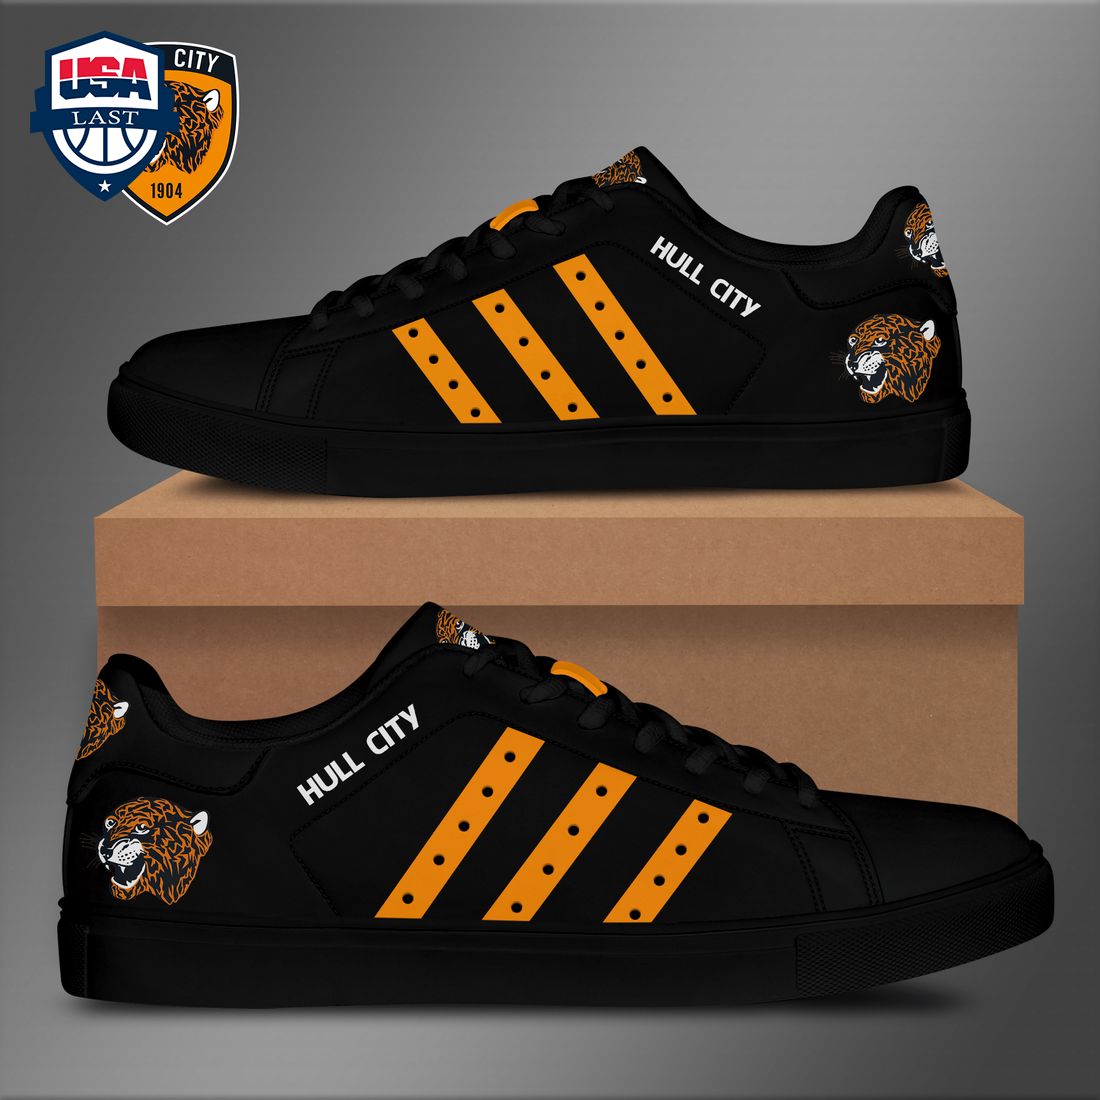 Hull City FC Orange Stripes Style 3 Stan Smith Low Top Shoes